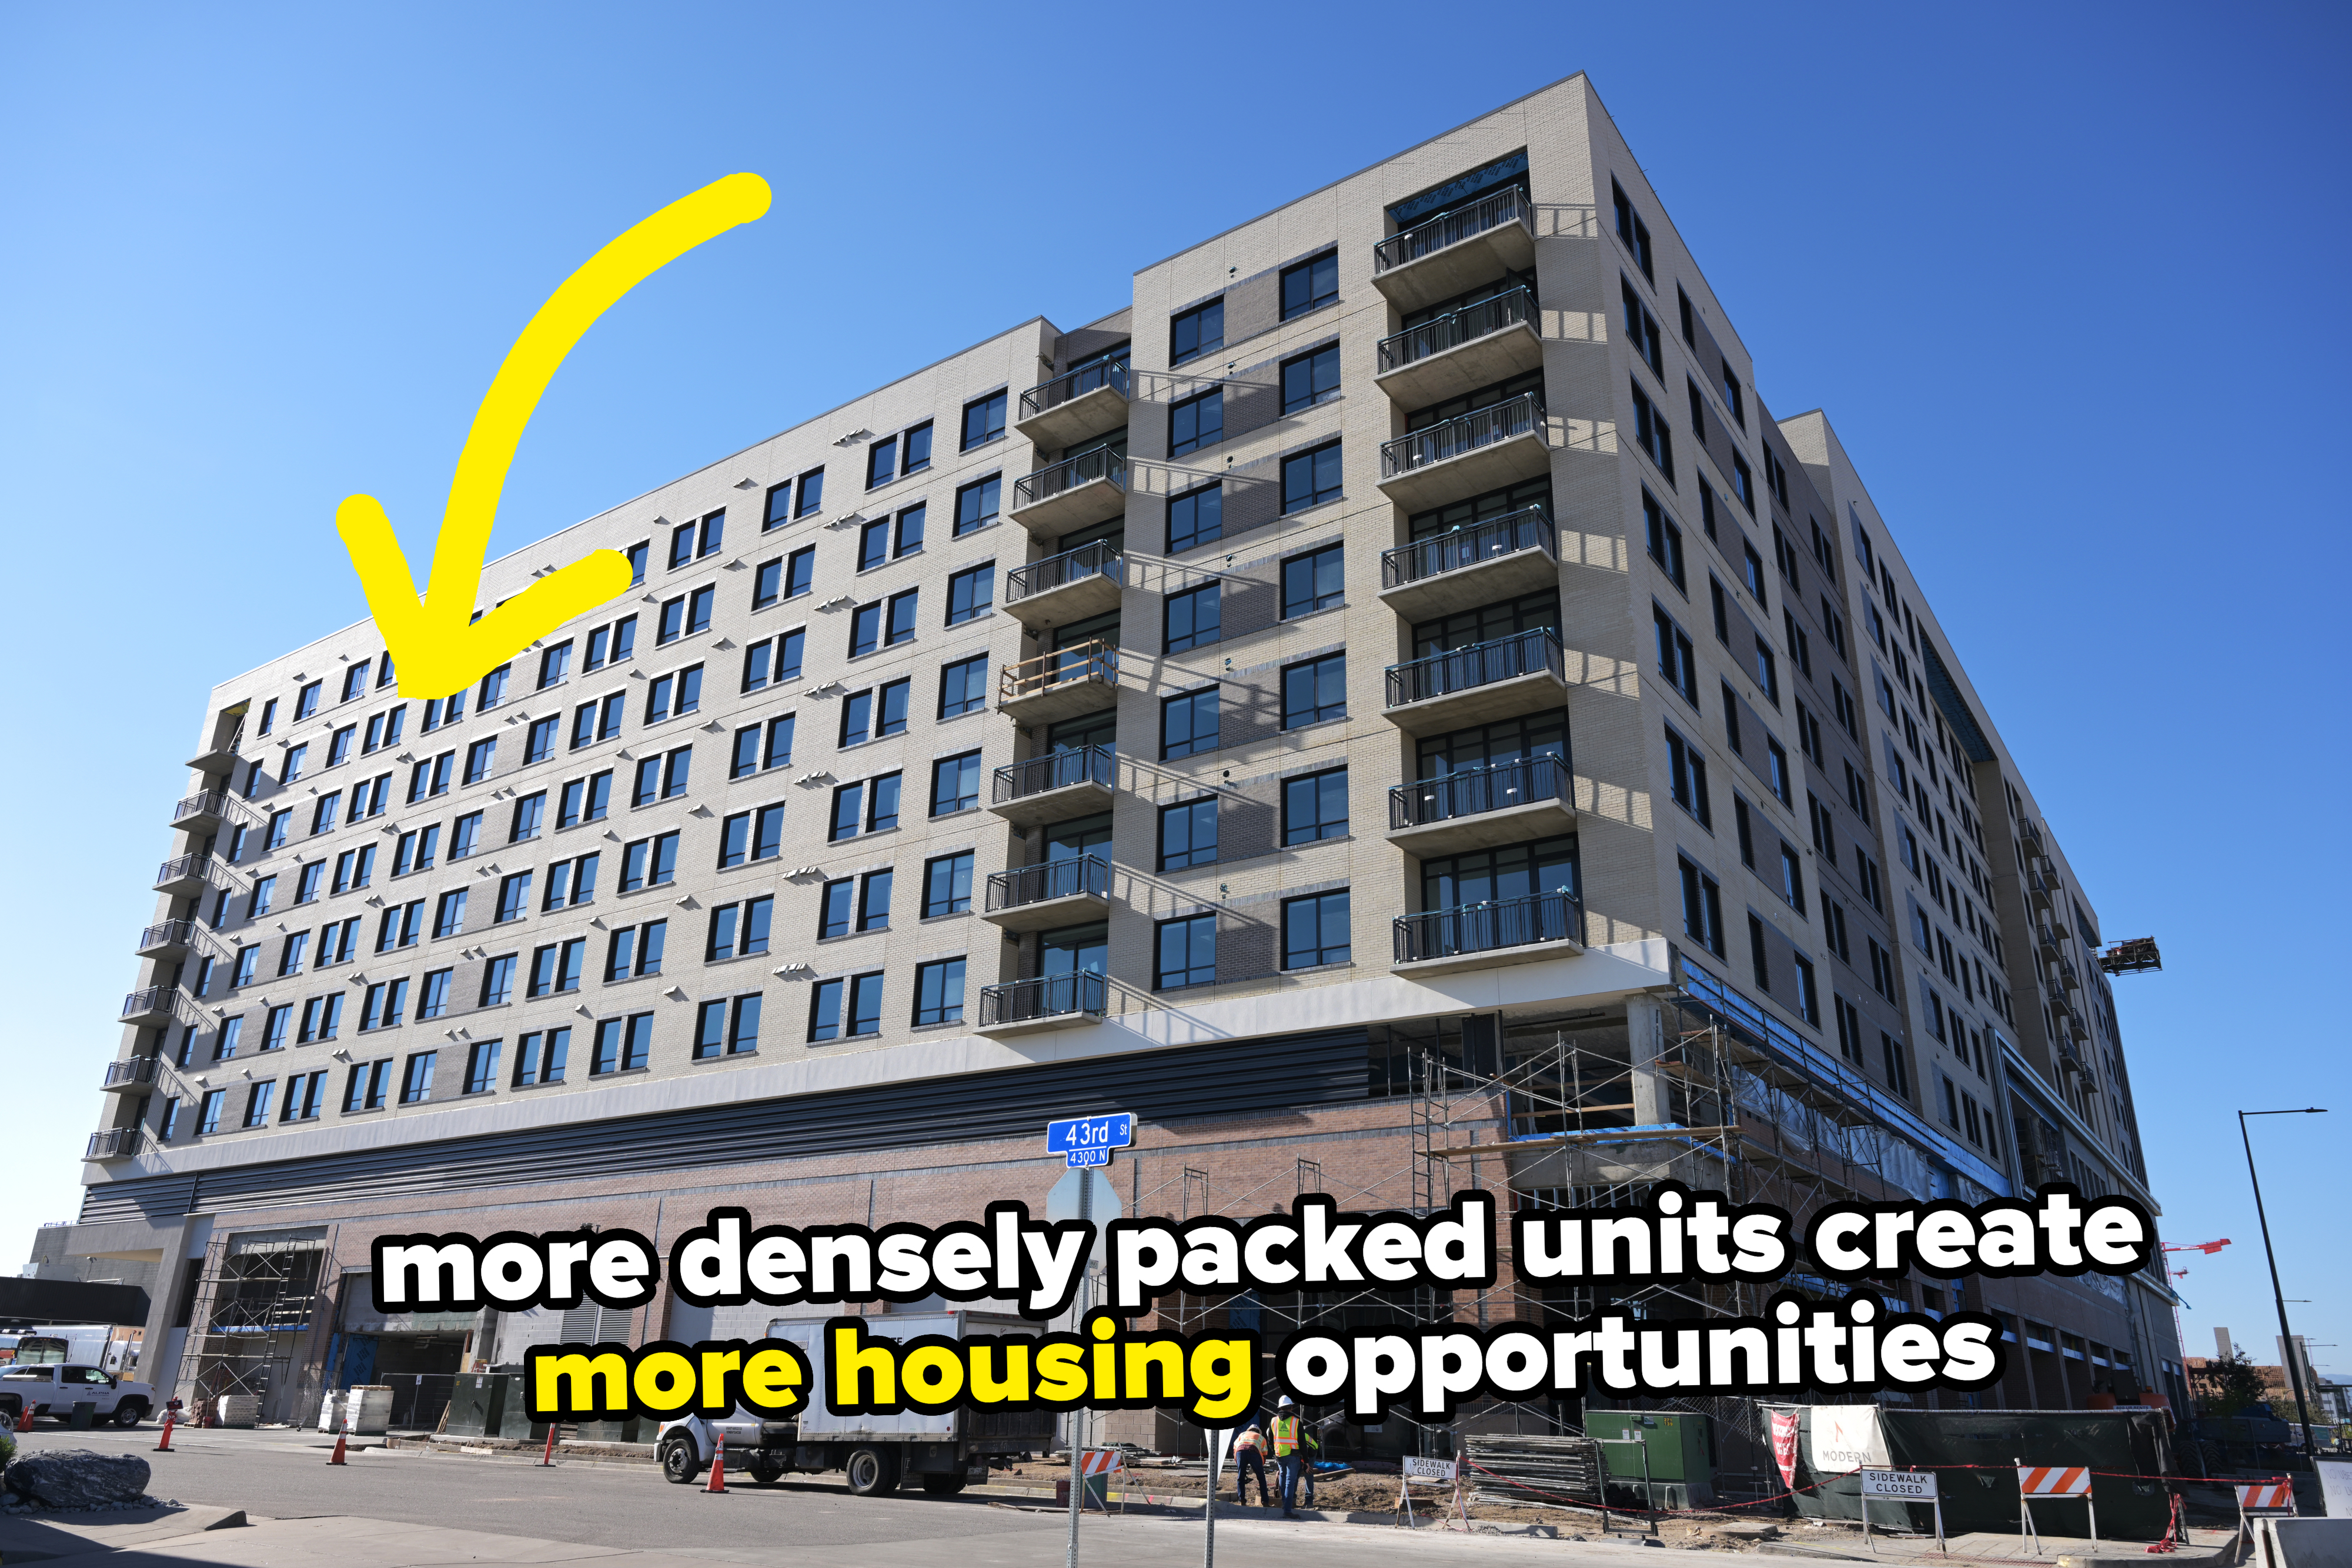 New apartment building with caption that says &quot;more densely packed units create more housing opportunities&quot;